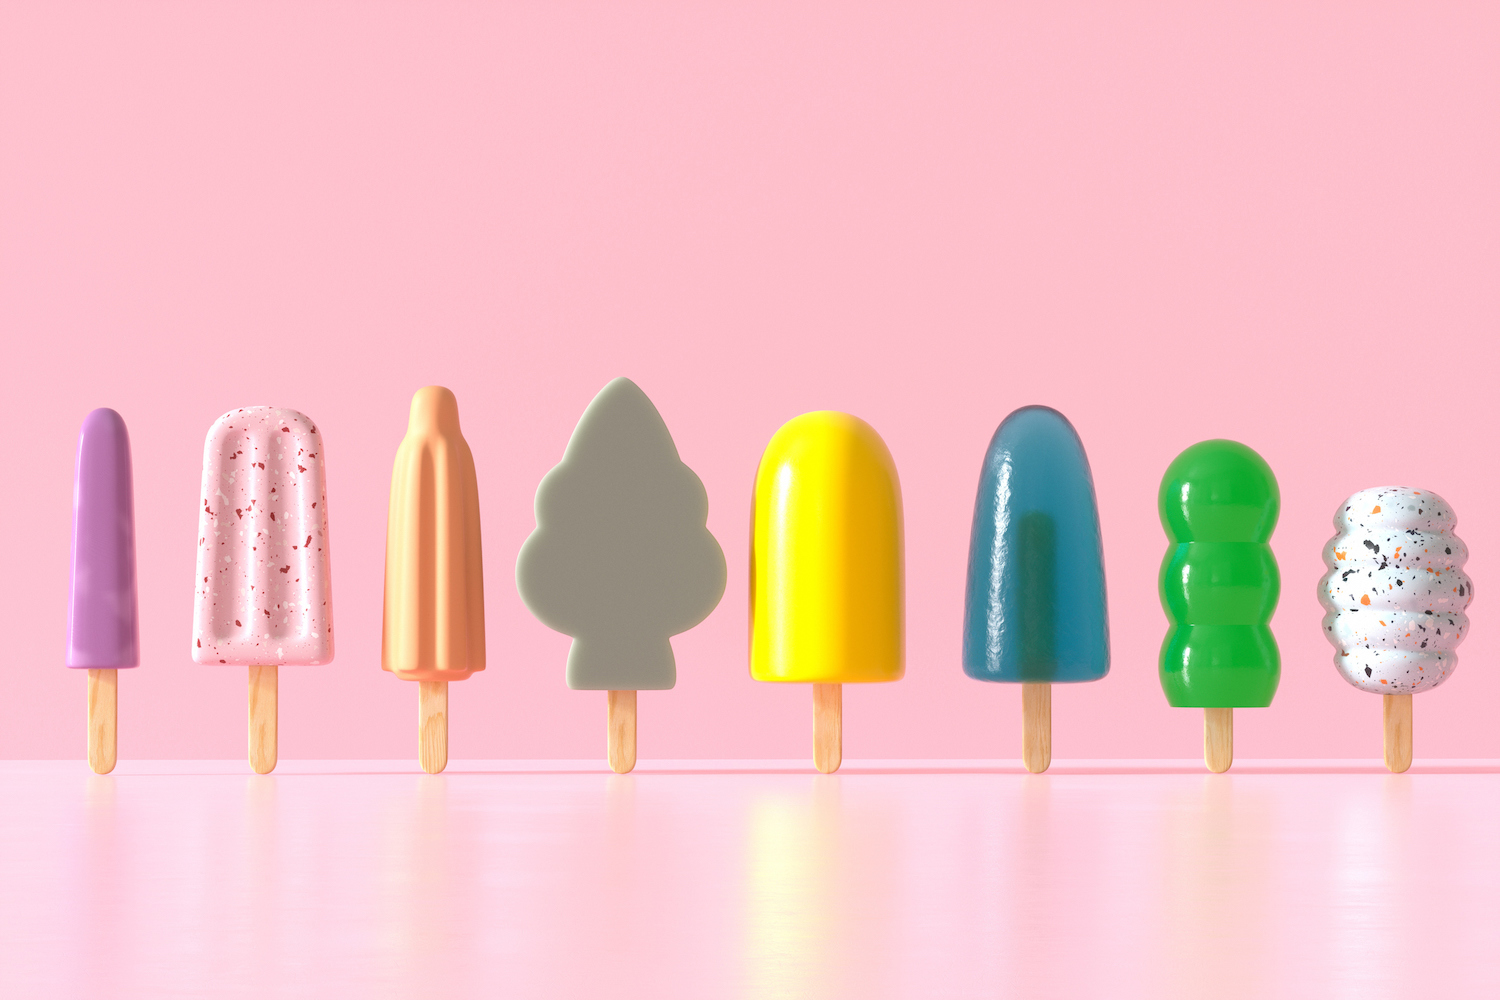 Digital generated image of many popsicles standing in row against pink background.